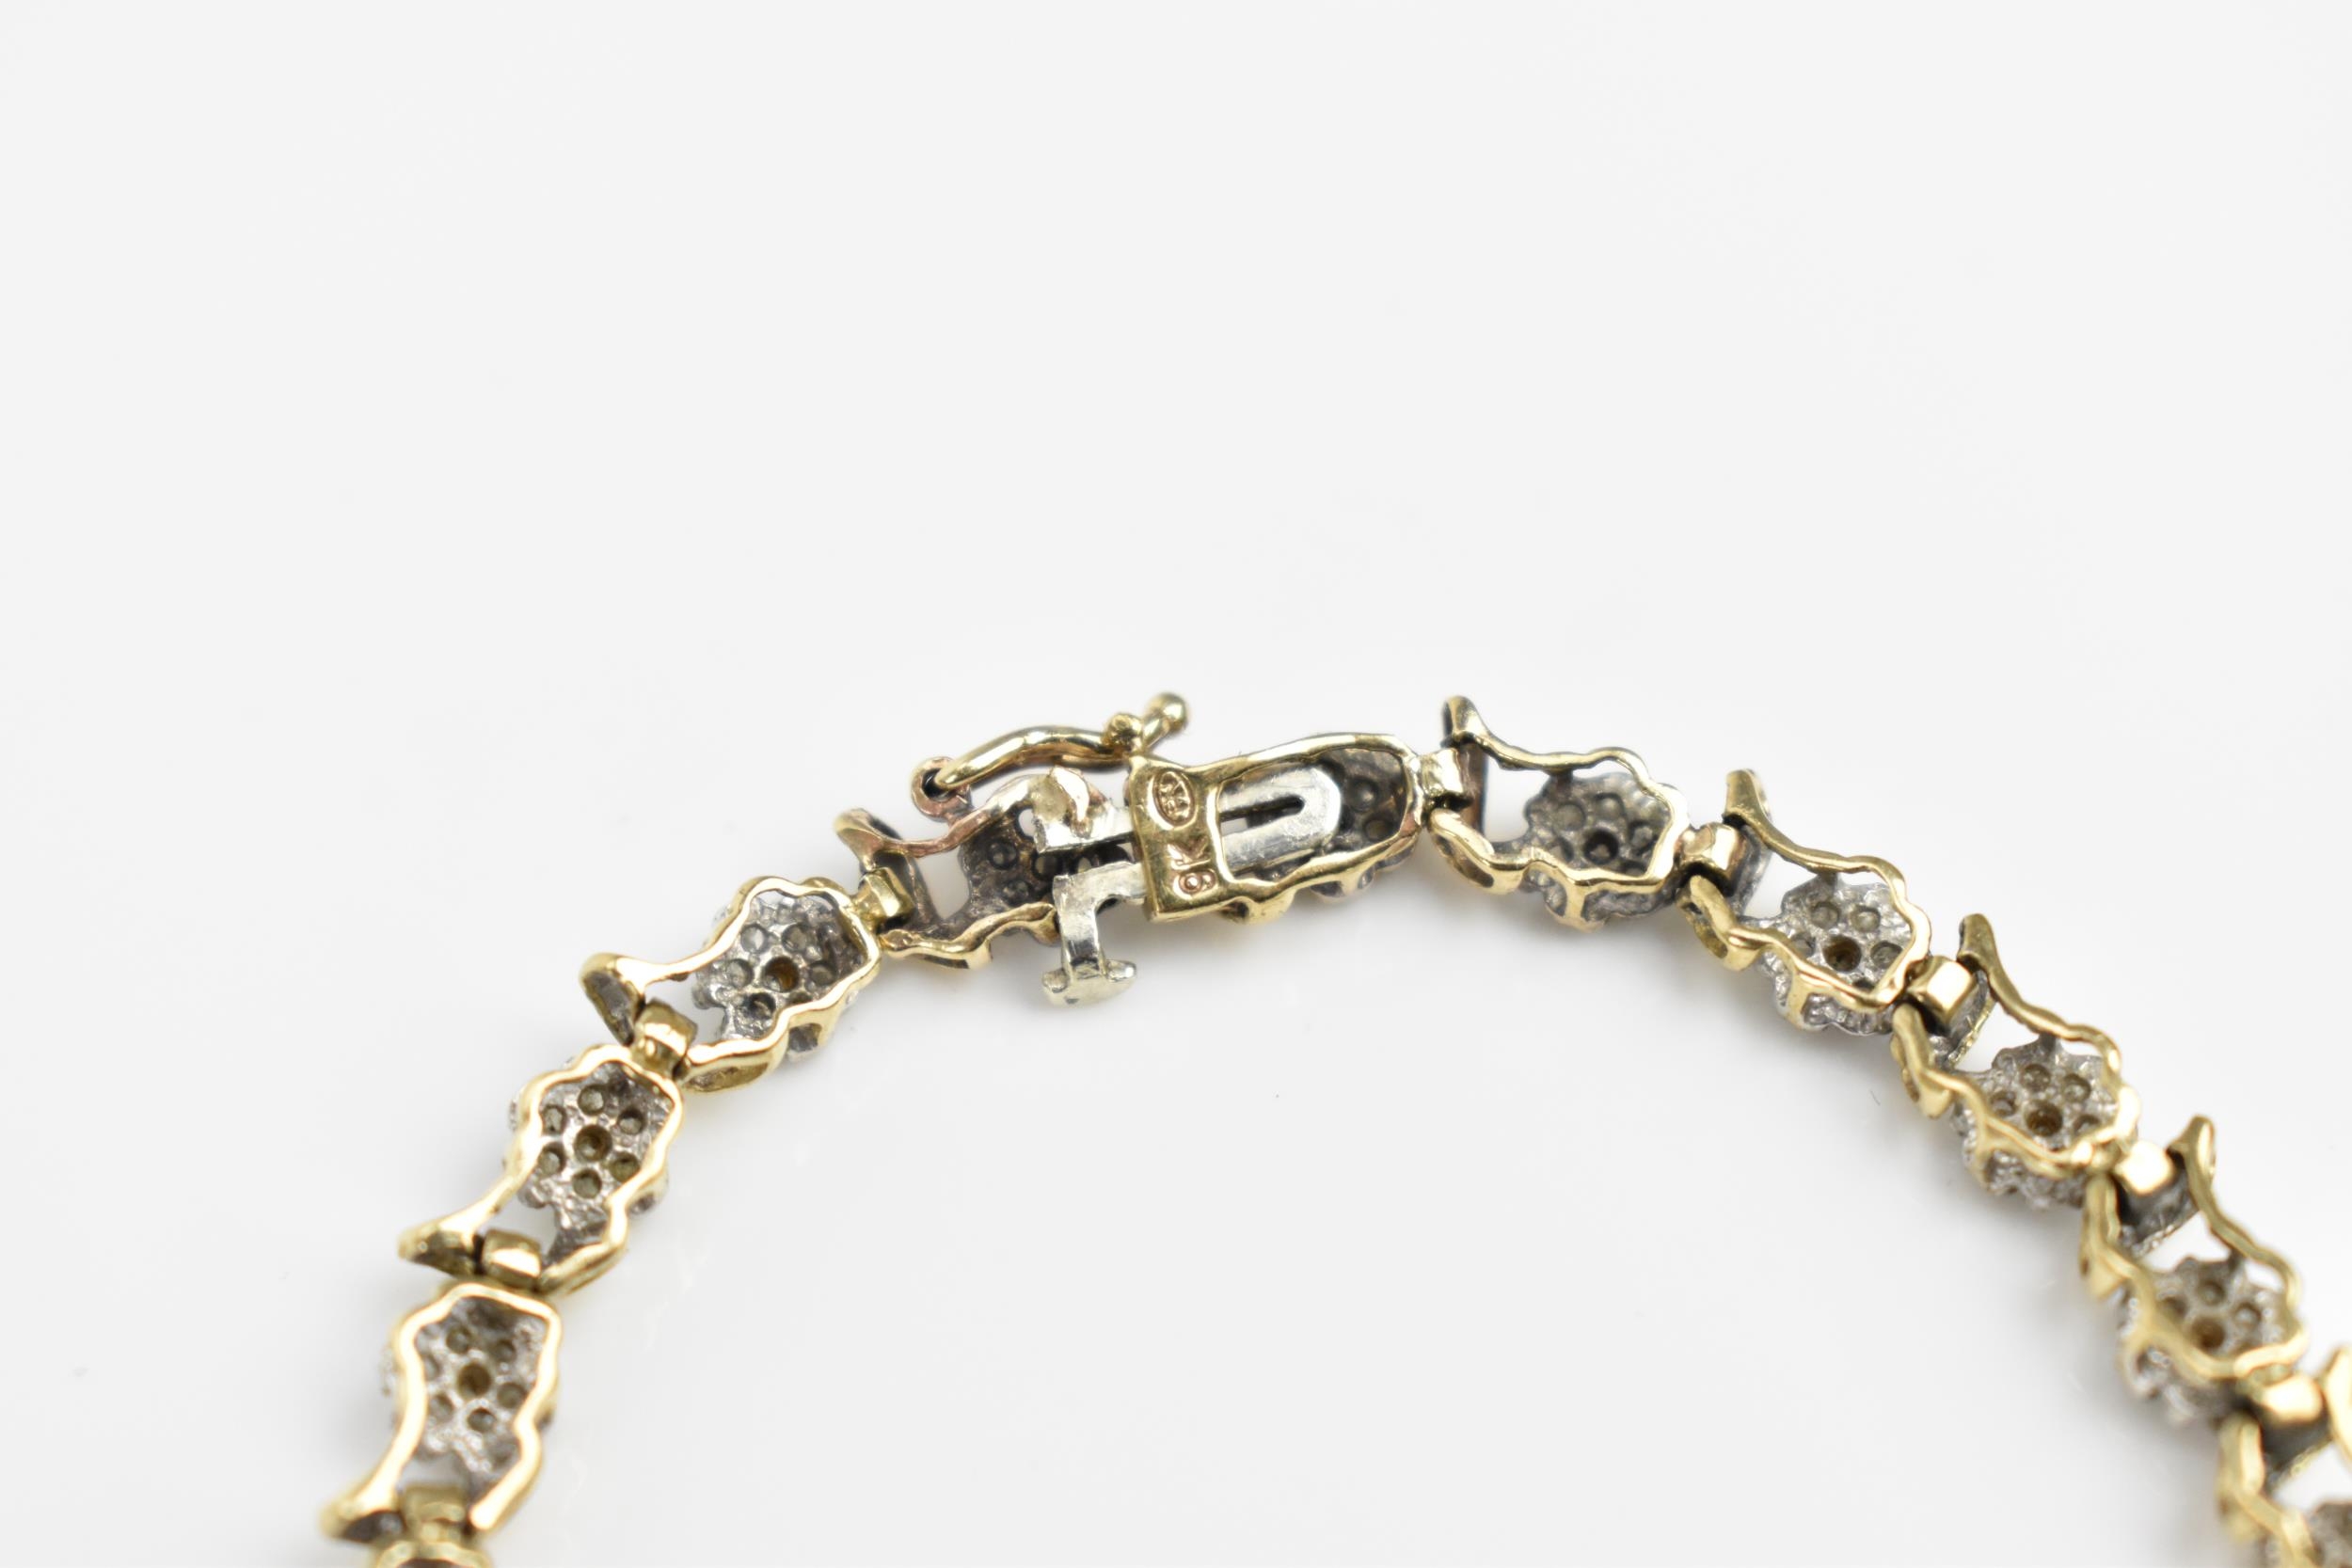 A 9ct yellow gold and diamond bracelet, designed with twenty-seven floral diamond clusters, with - Image 7 of 7